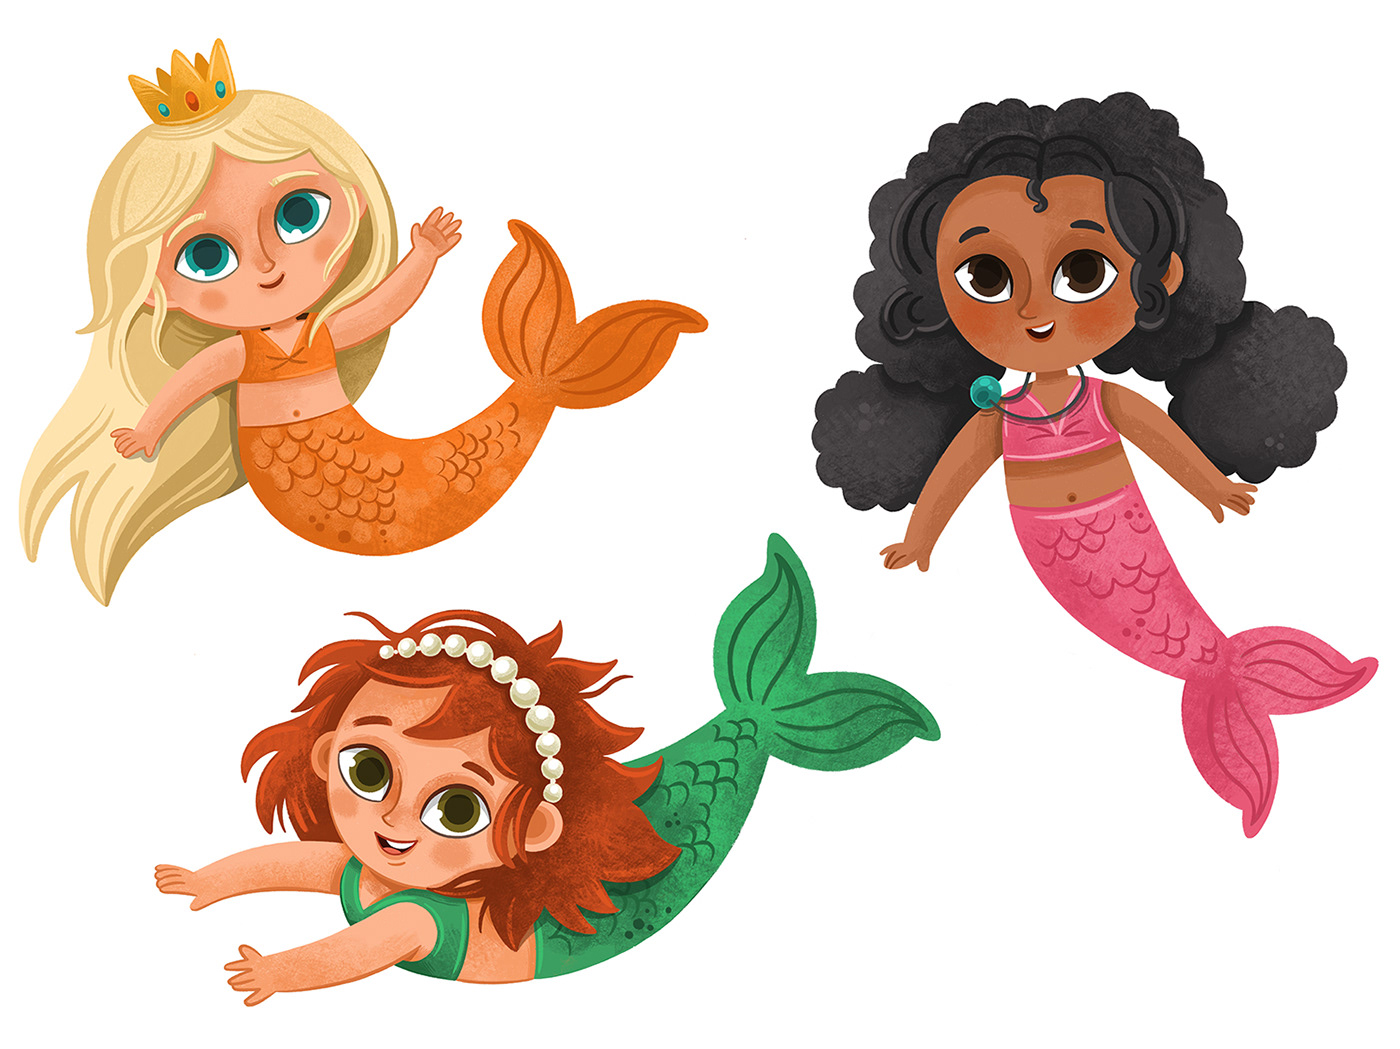 Little mermaids and their houses.